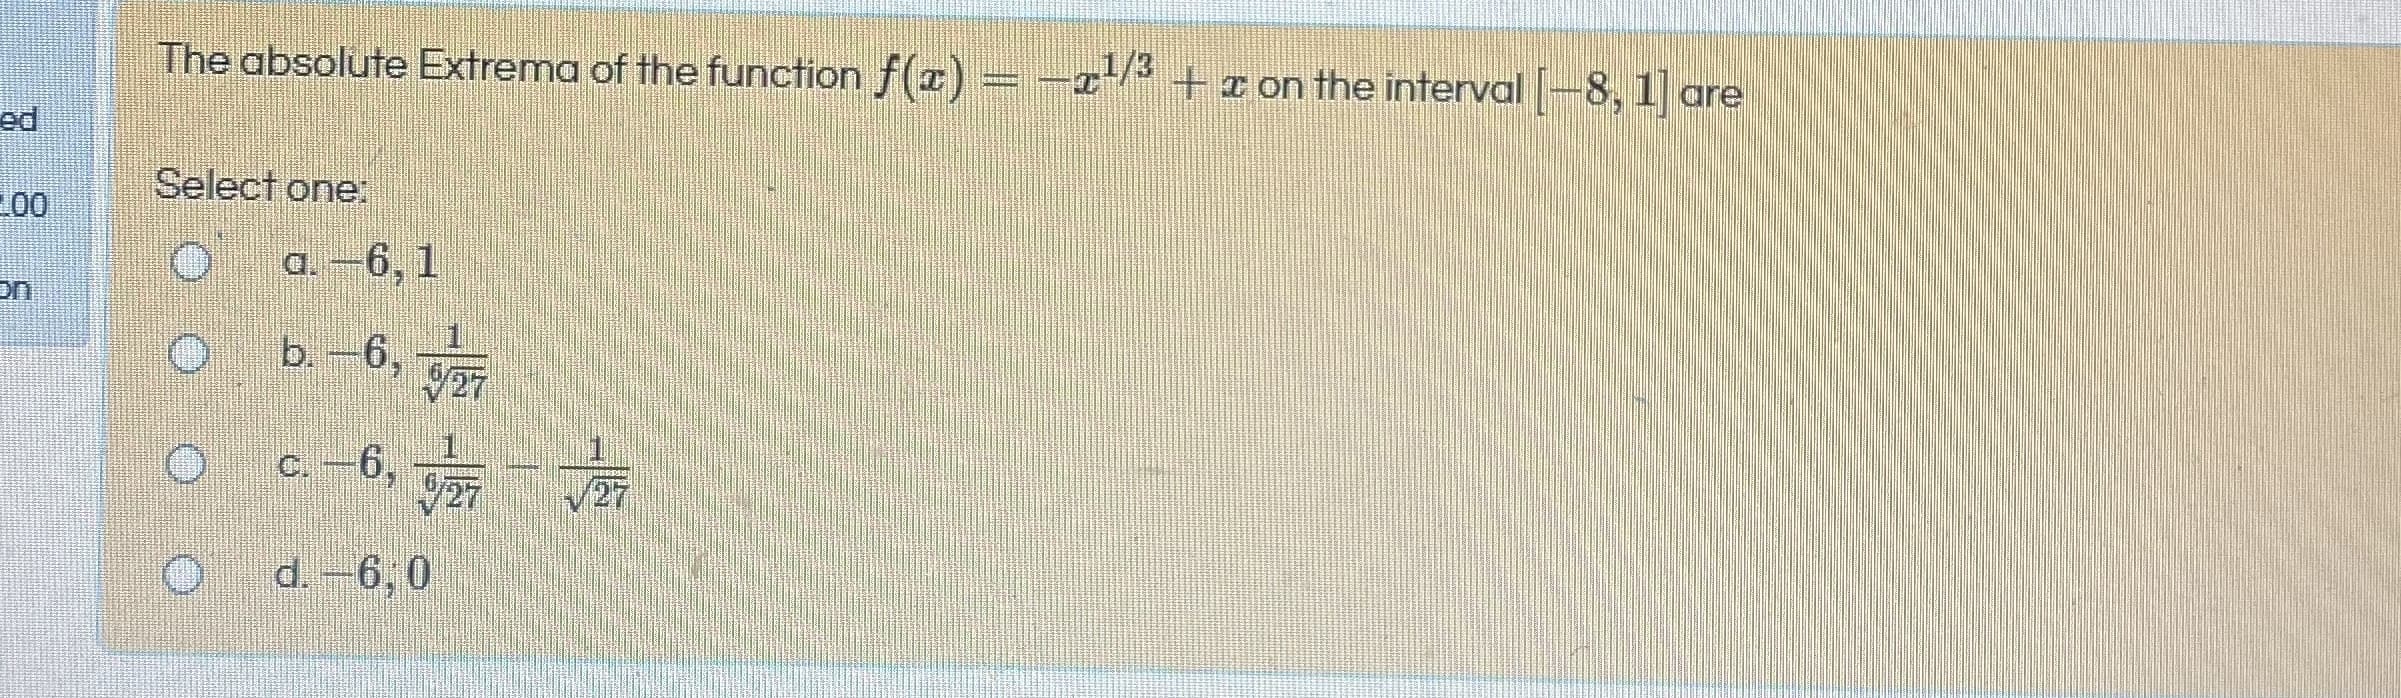 The absolute Extrema of the function f(T) = -x-*
-21/3
+r on the interval [
8, 1] are
Select one:
a. -6, 1
b.-6,
C.-6,
0 9 P
